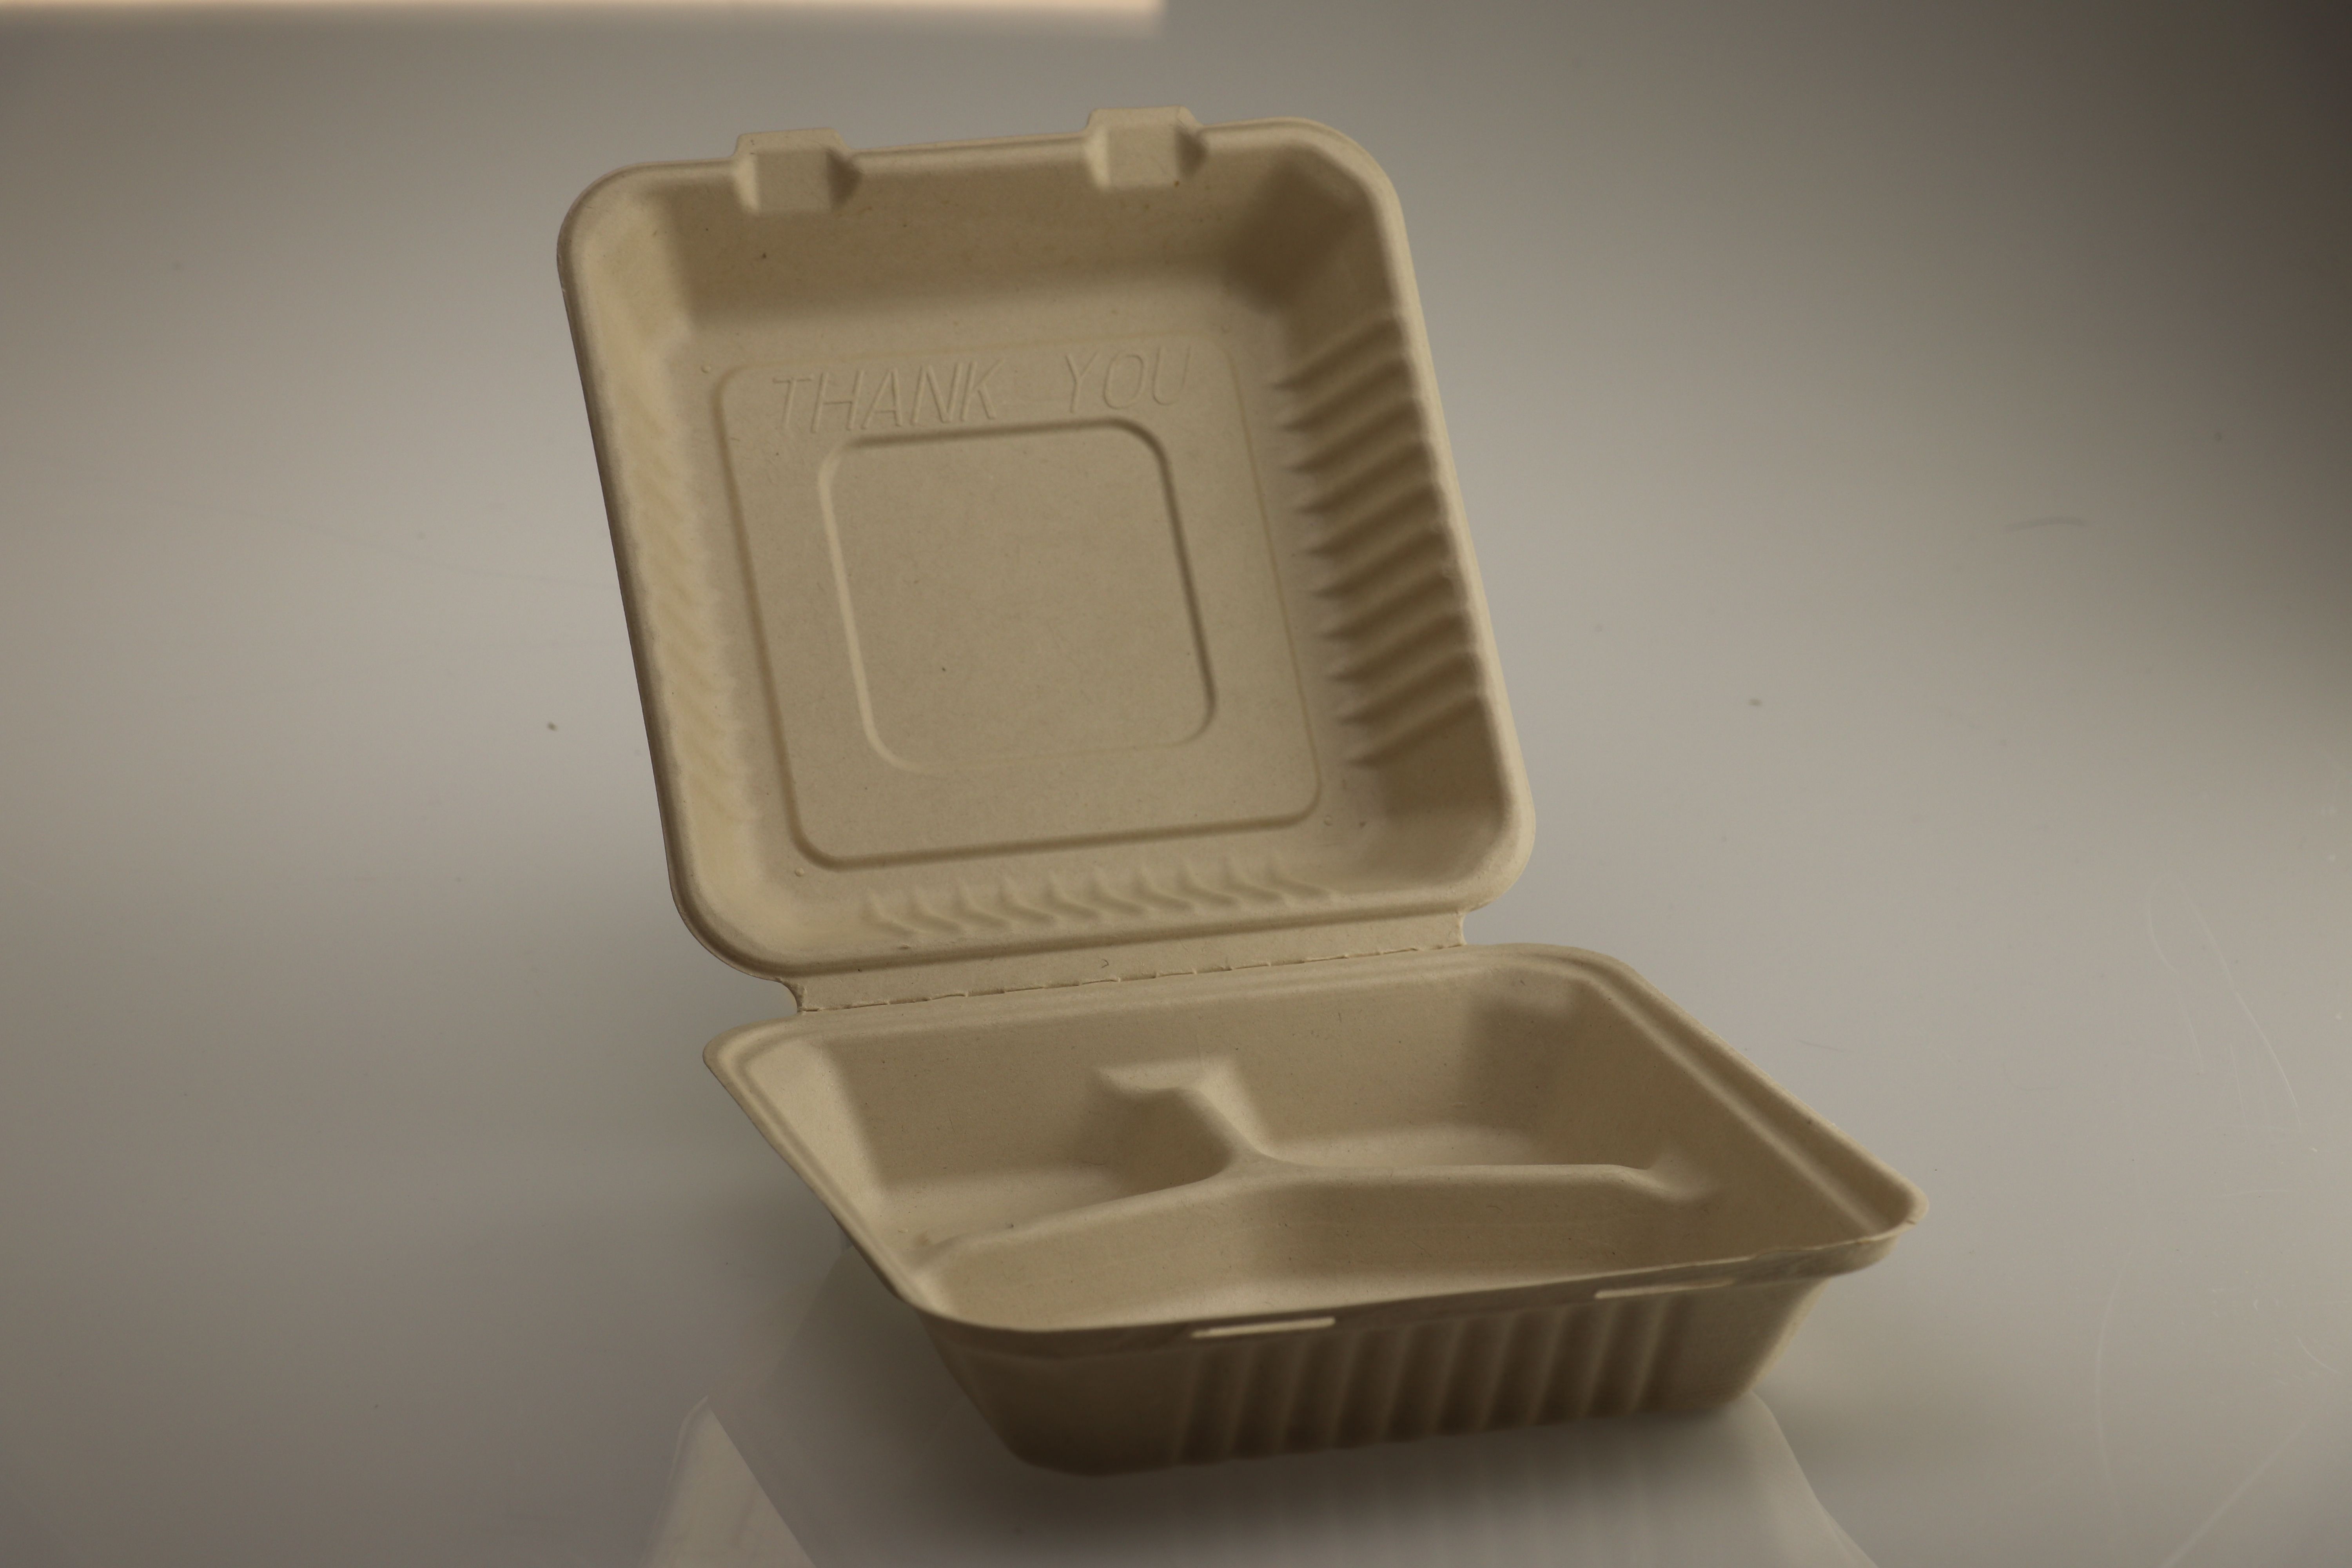 Footprint Launches PFAS-Free, Compostable, Clamshell To-Go Food